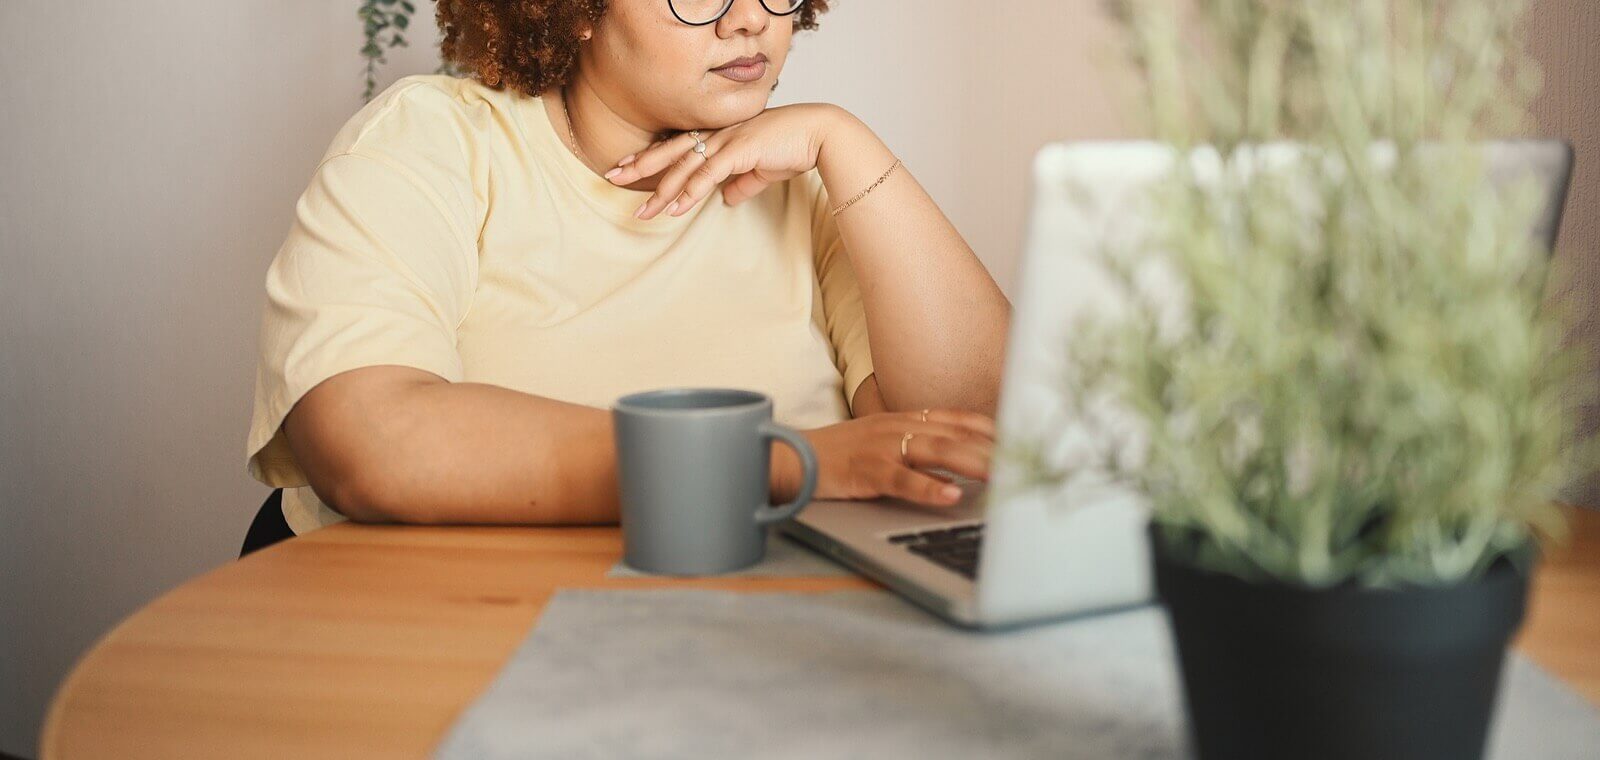 A woman types on her laptop while sitting at a table. Are you trying to create good SEO content but do not know how? Speak with Simplified SEO Consulting today to see how we can help your SEO strategy.